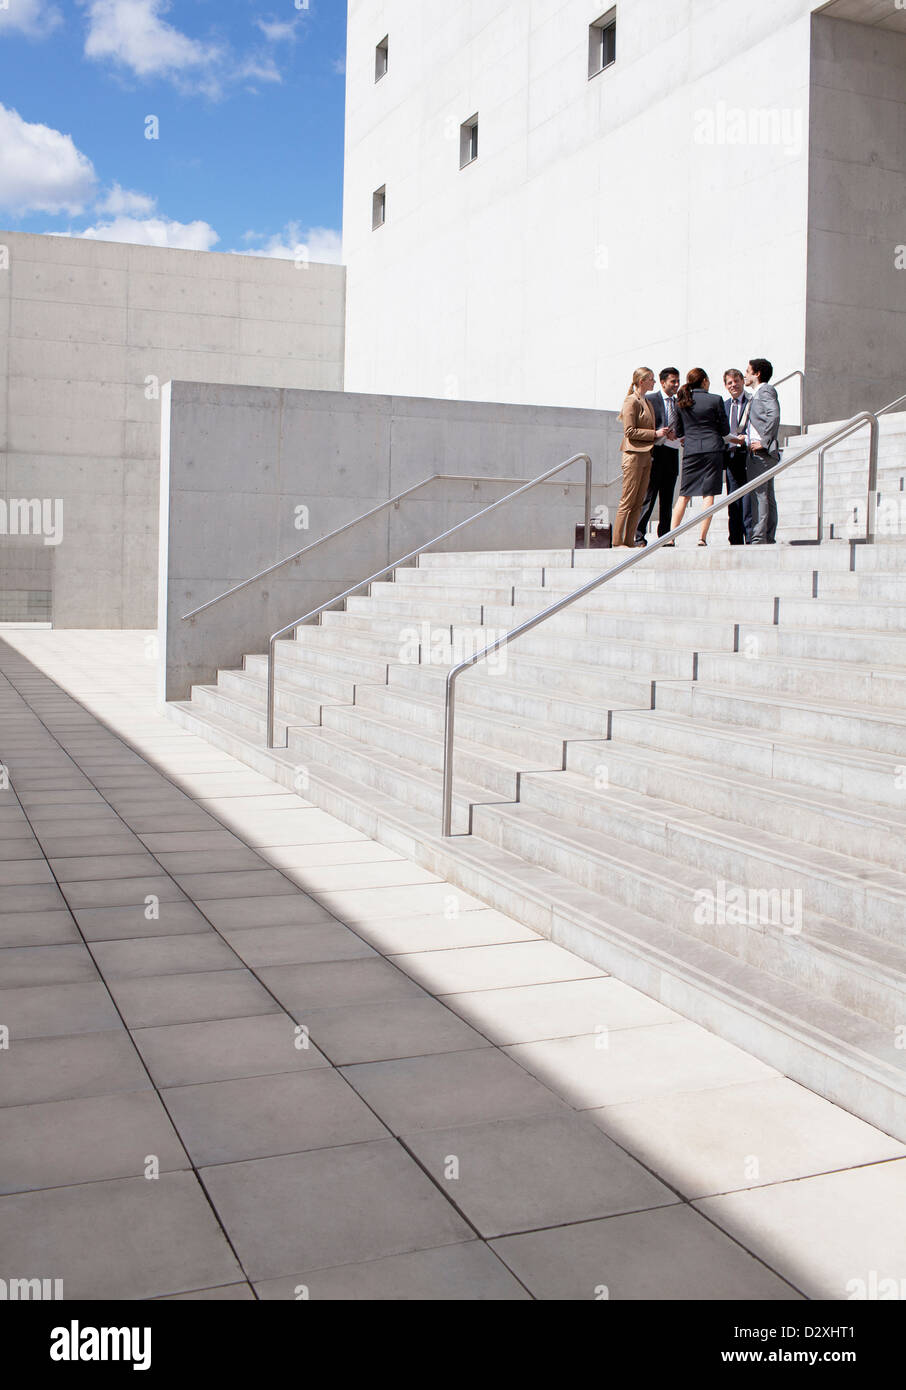 Business people meeting on urban stairs Stock Photo